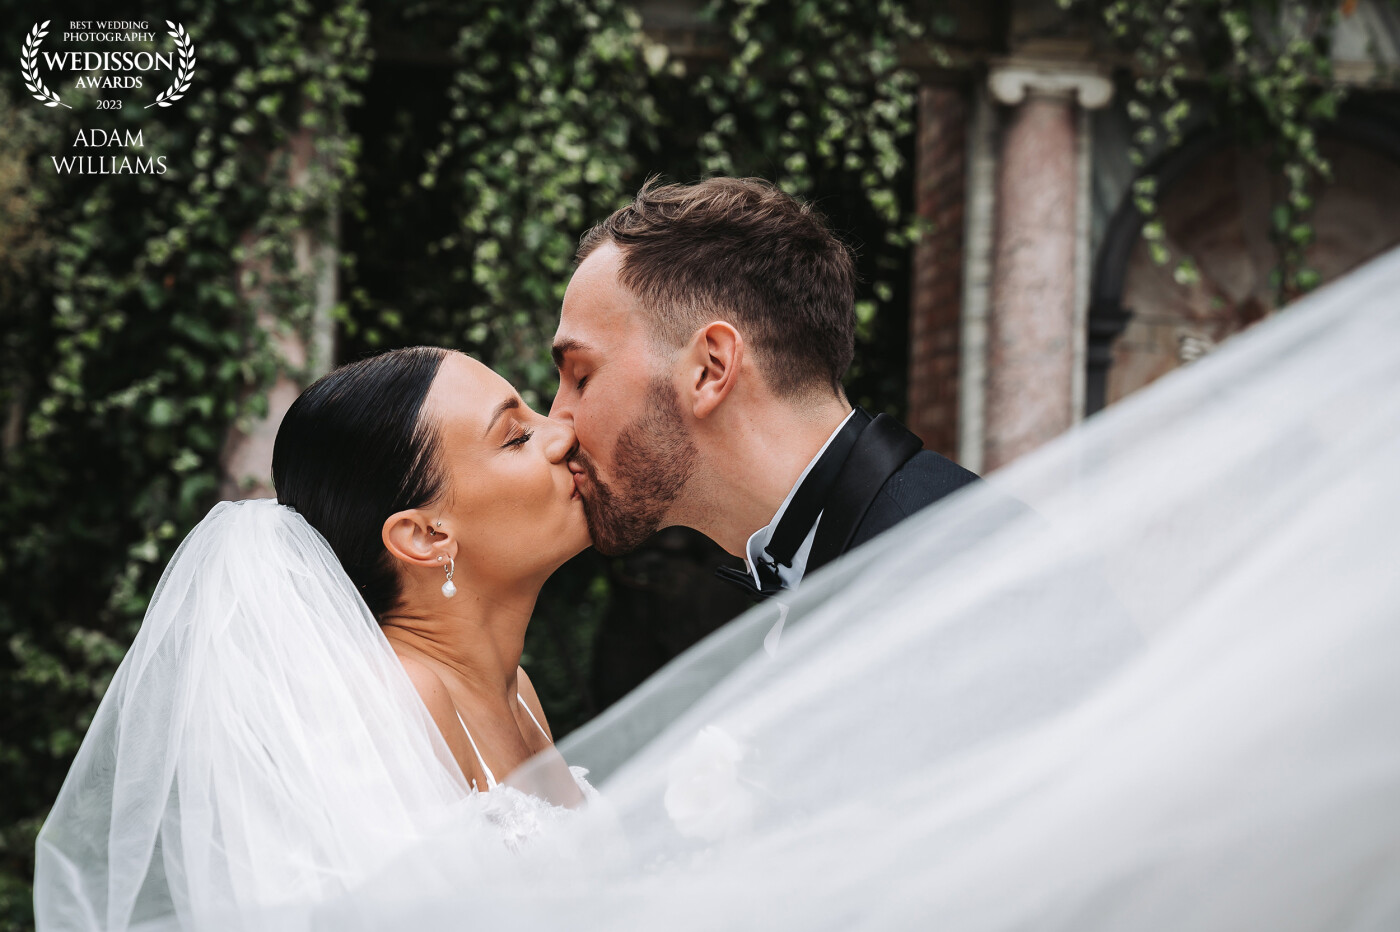 We absolutely loved photographing this beautiful couple, Paris had a fantastic long veil and worked very well with the wind and got some gorgeous couple portraits!